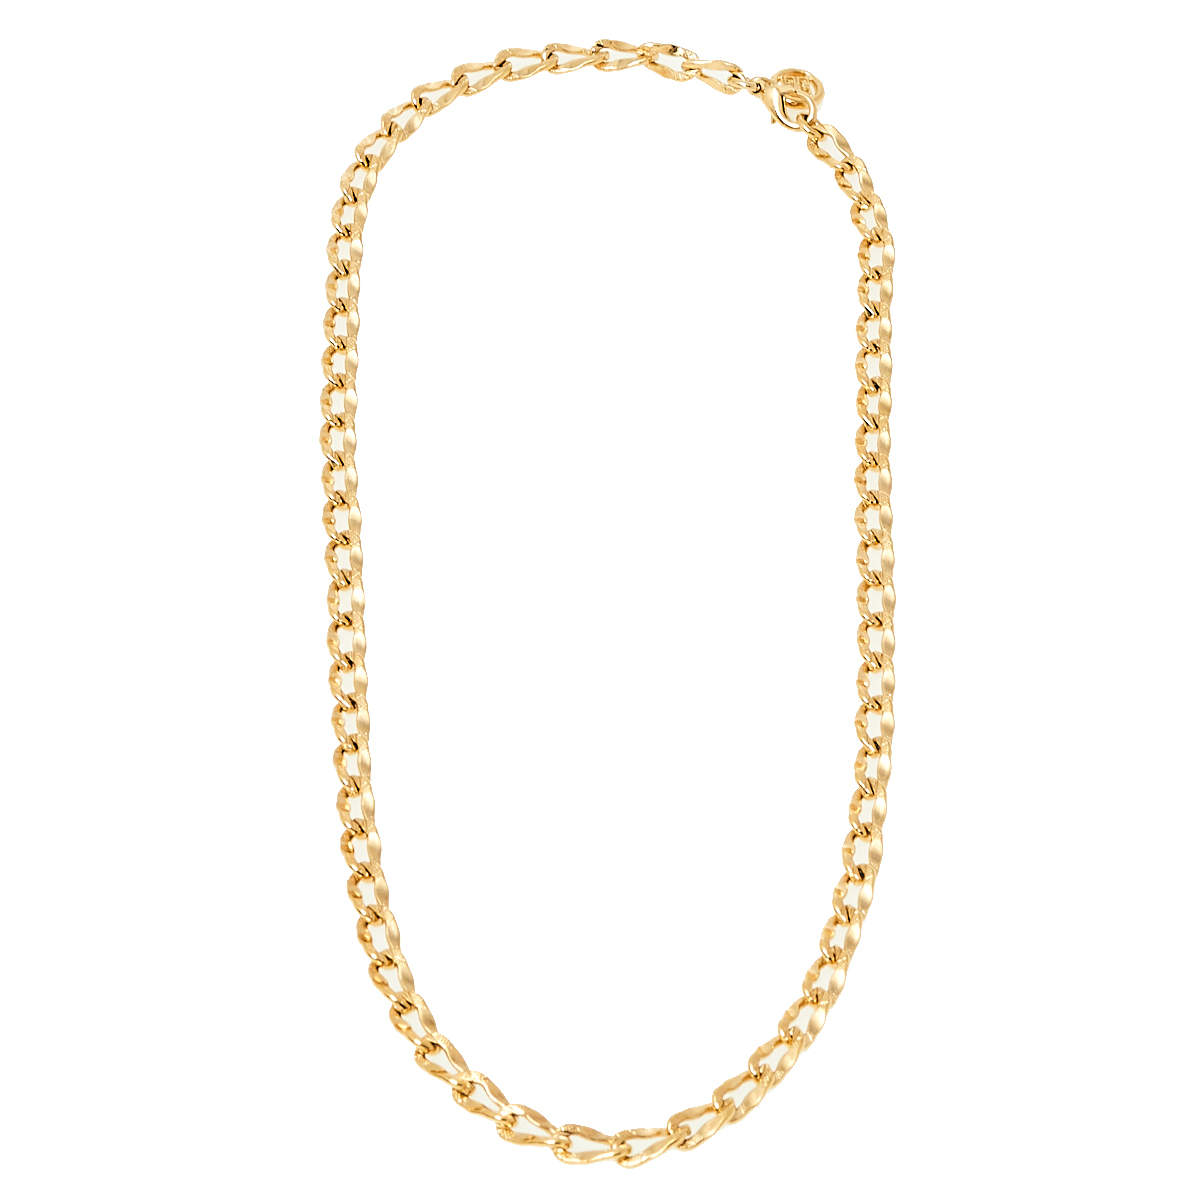 Givenchy Vintage Gold Tone Chain Link Necklace